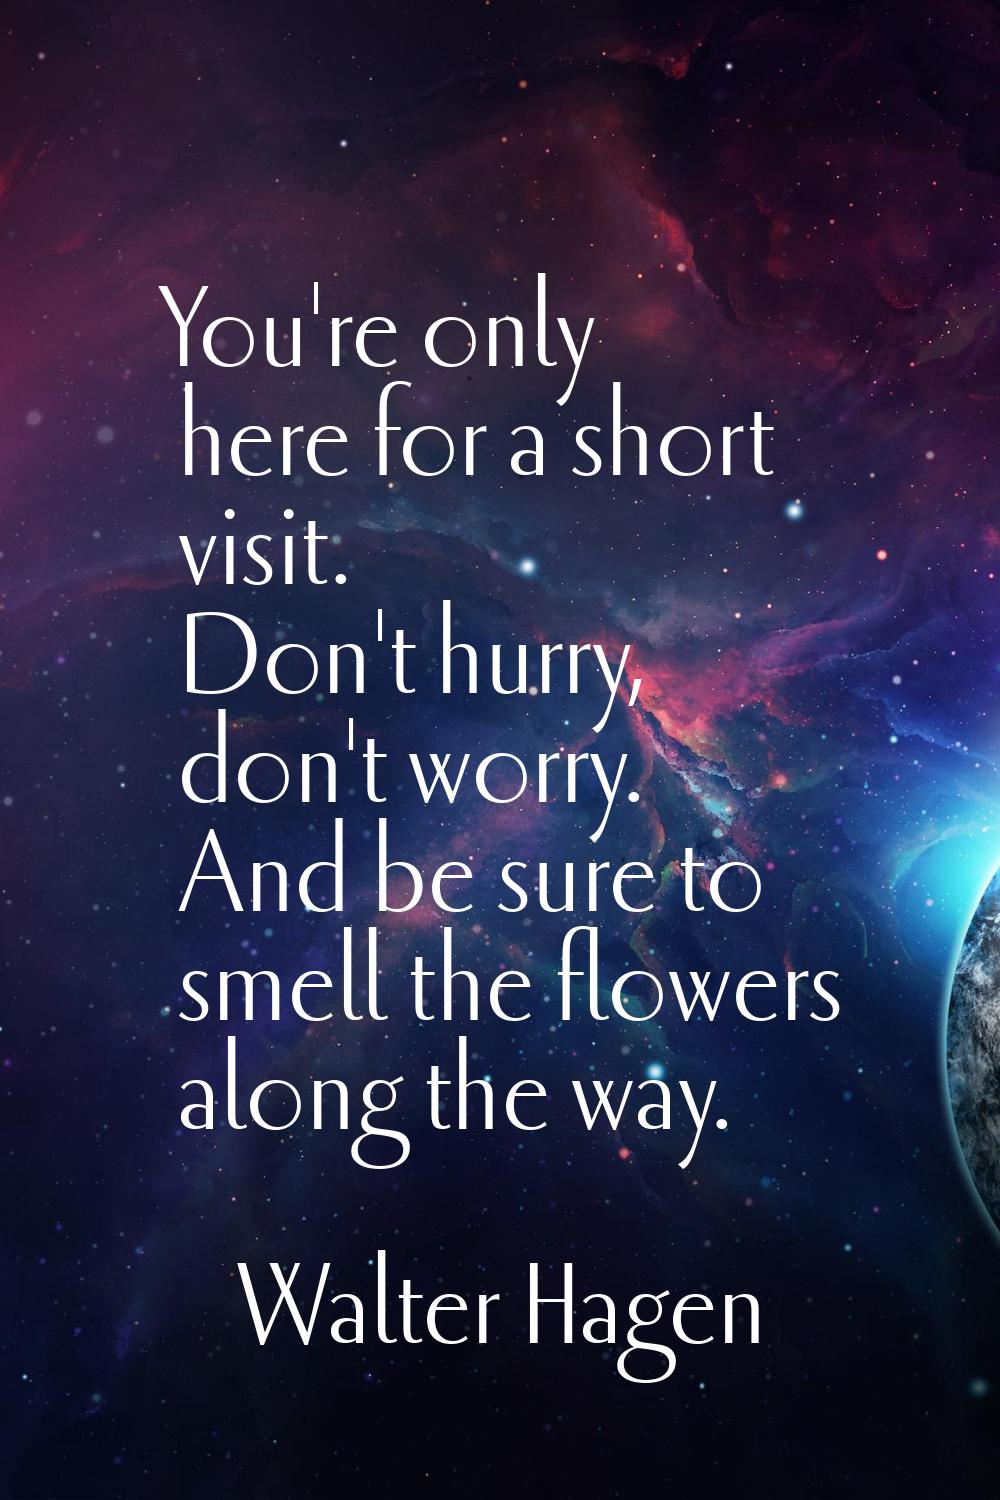 You're only here for a short visit. Don't hurry, don't worry. And be sure to smell the flowers alon